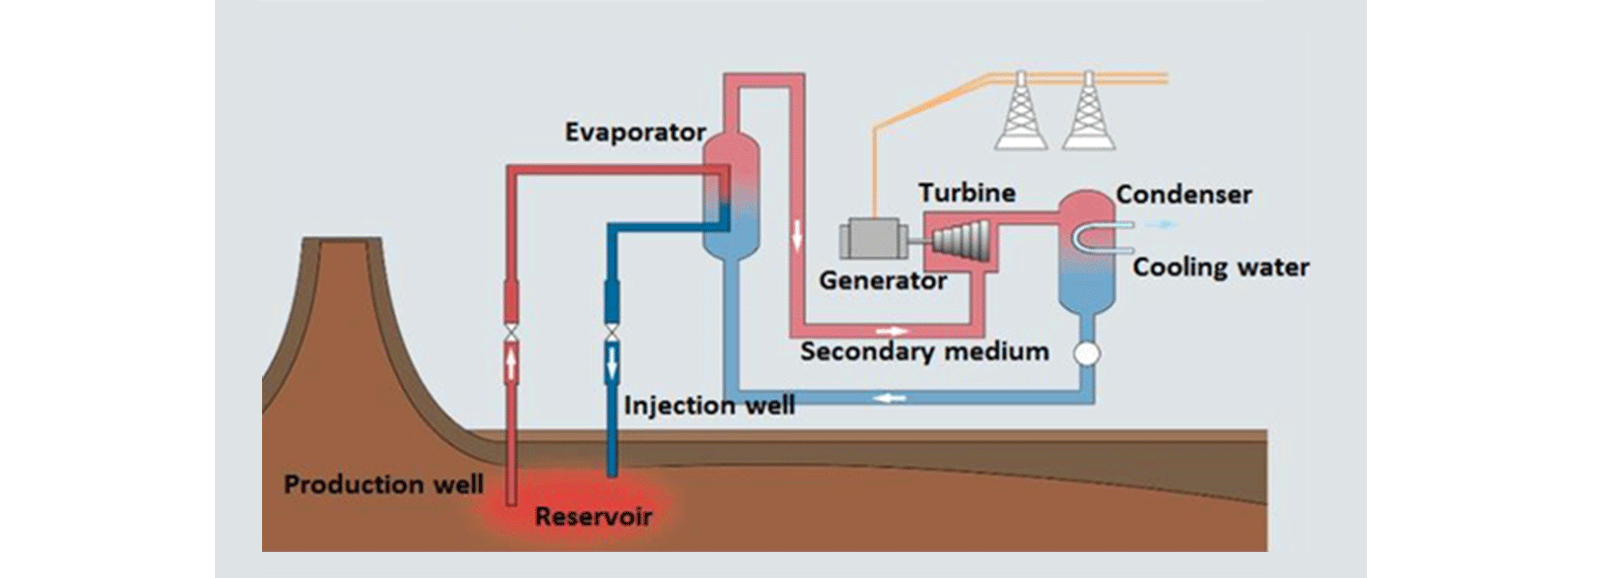 geothermal power plant binary cycle system diagram